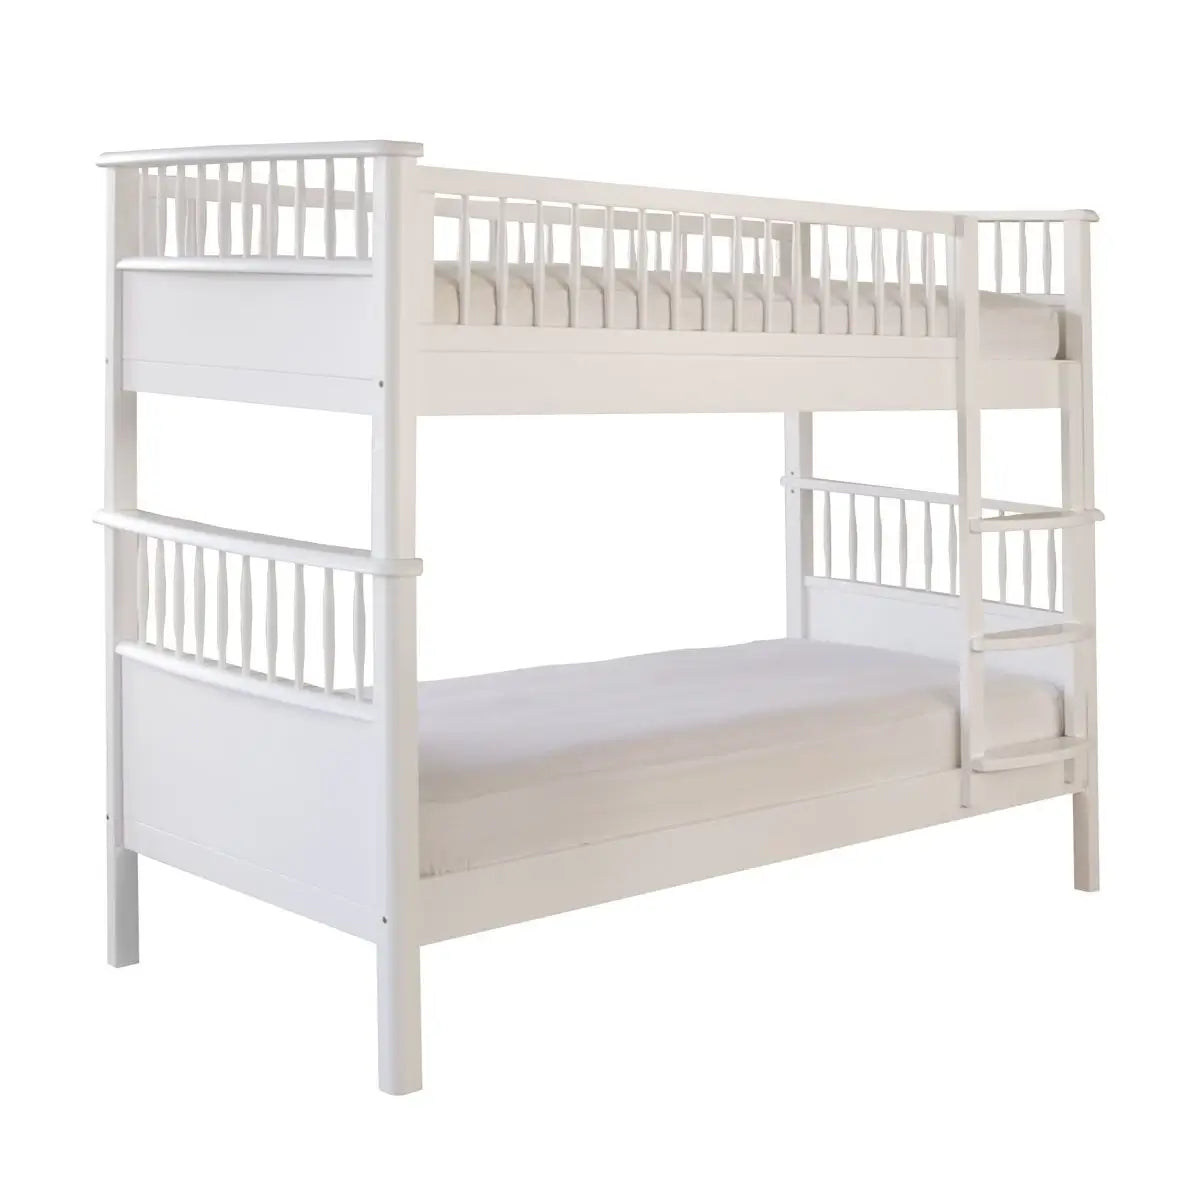 Little Folks Bowood Bunk Bed in Pure White - Little Snoozes